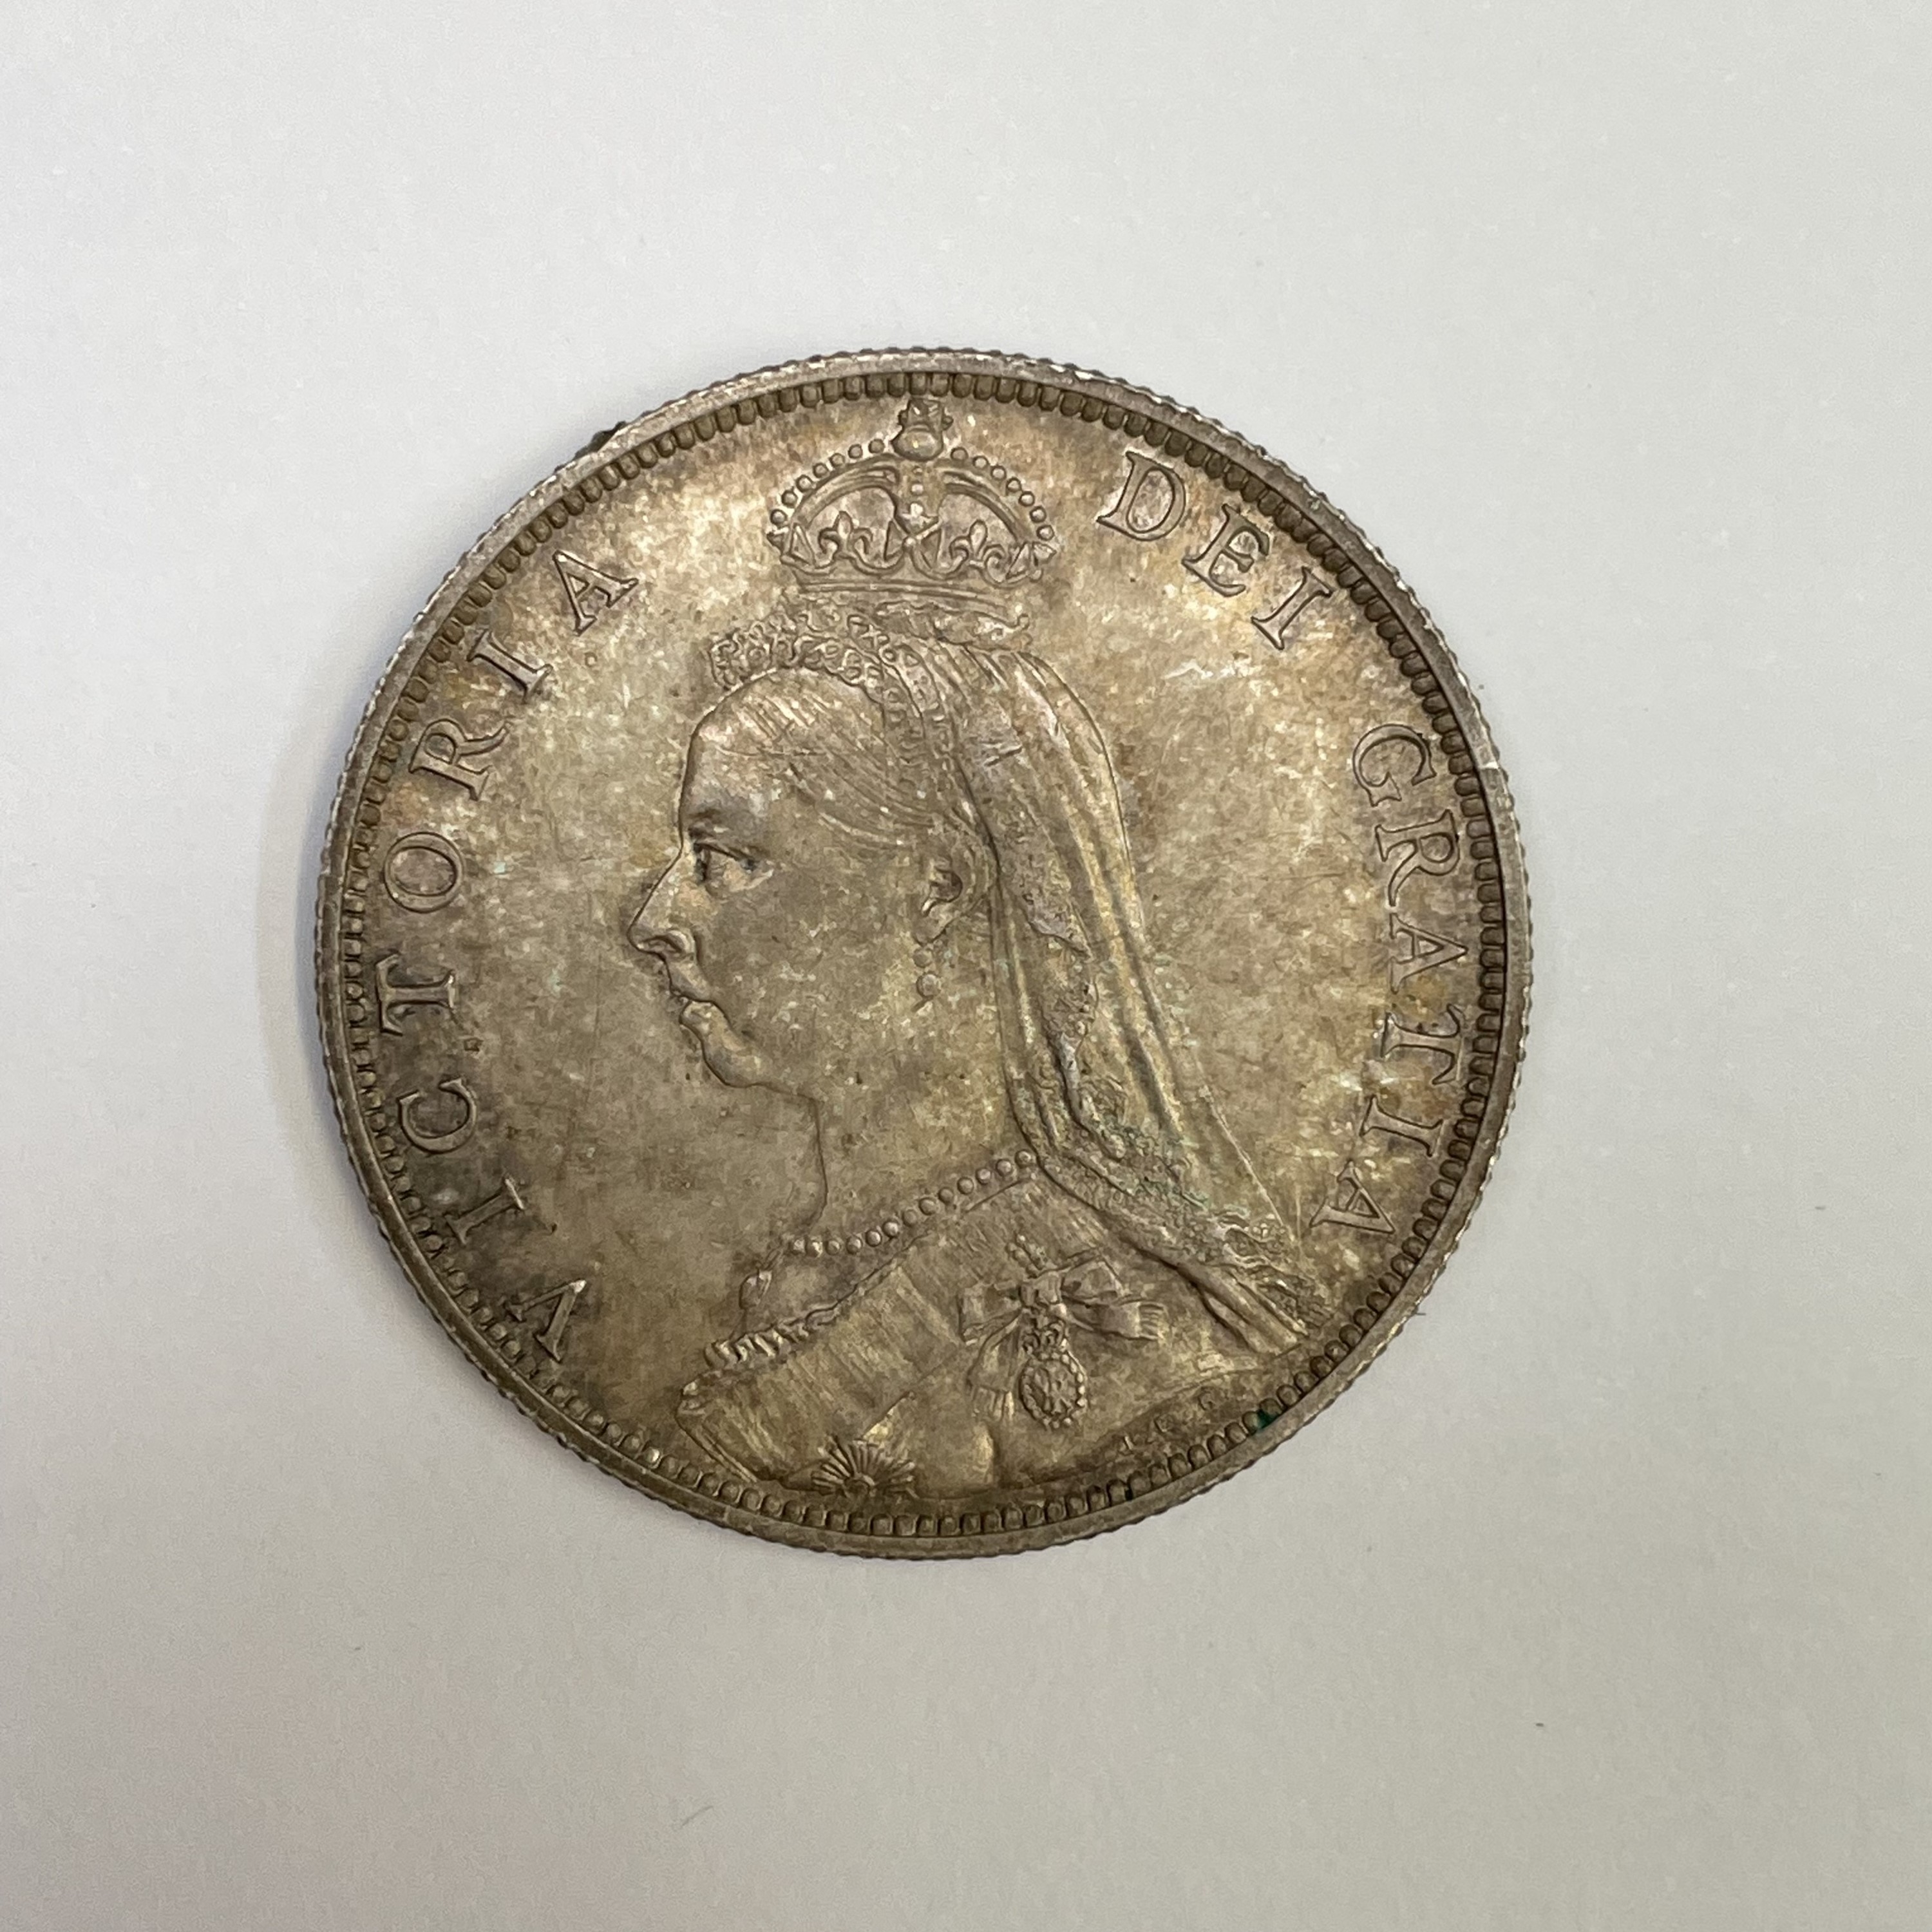 Great Britain and World Coins An 1888 silver 2/- coin (EF+), a circa 1800 copper trading - Image 9 of 11